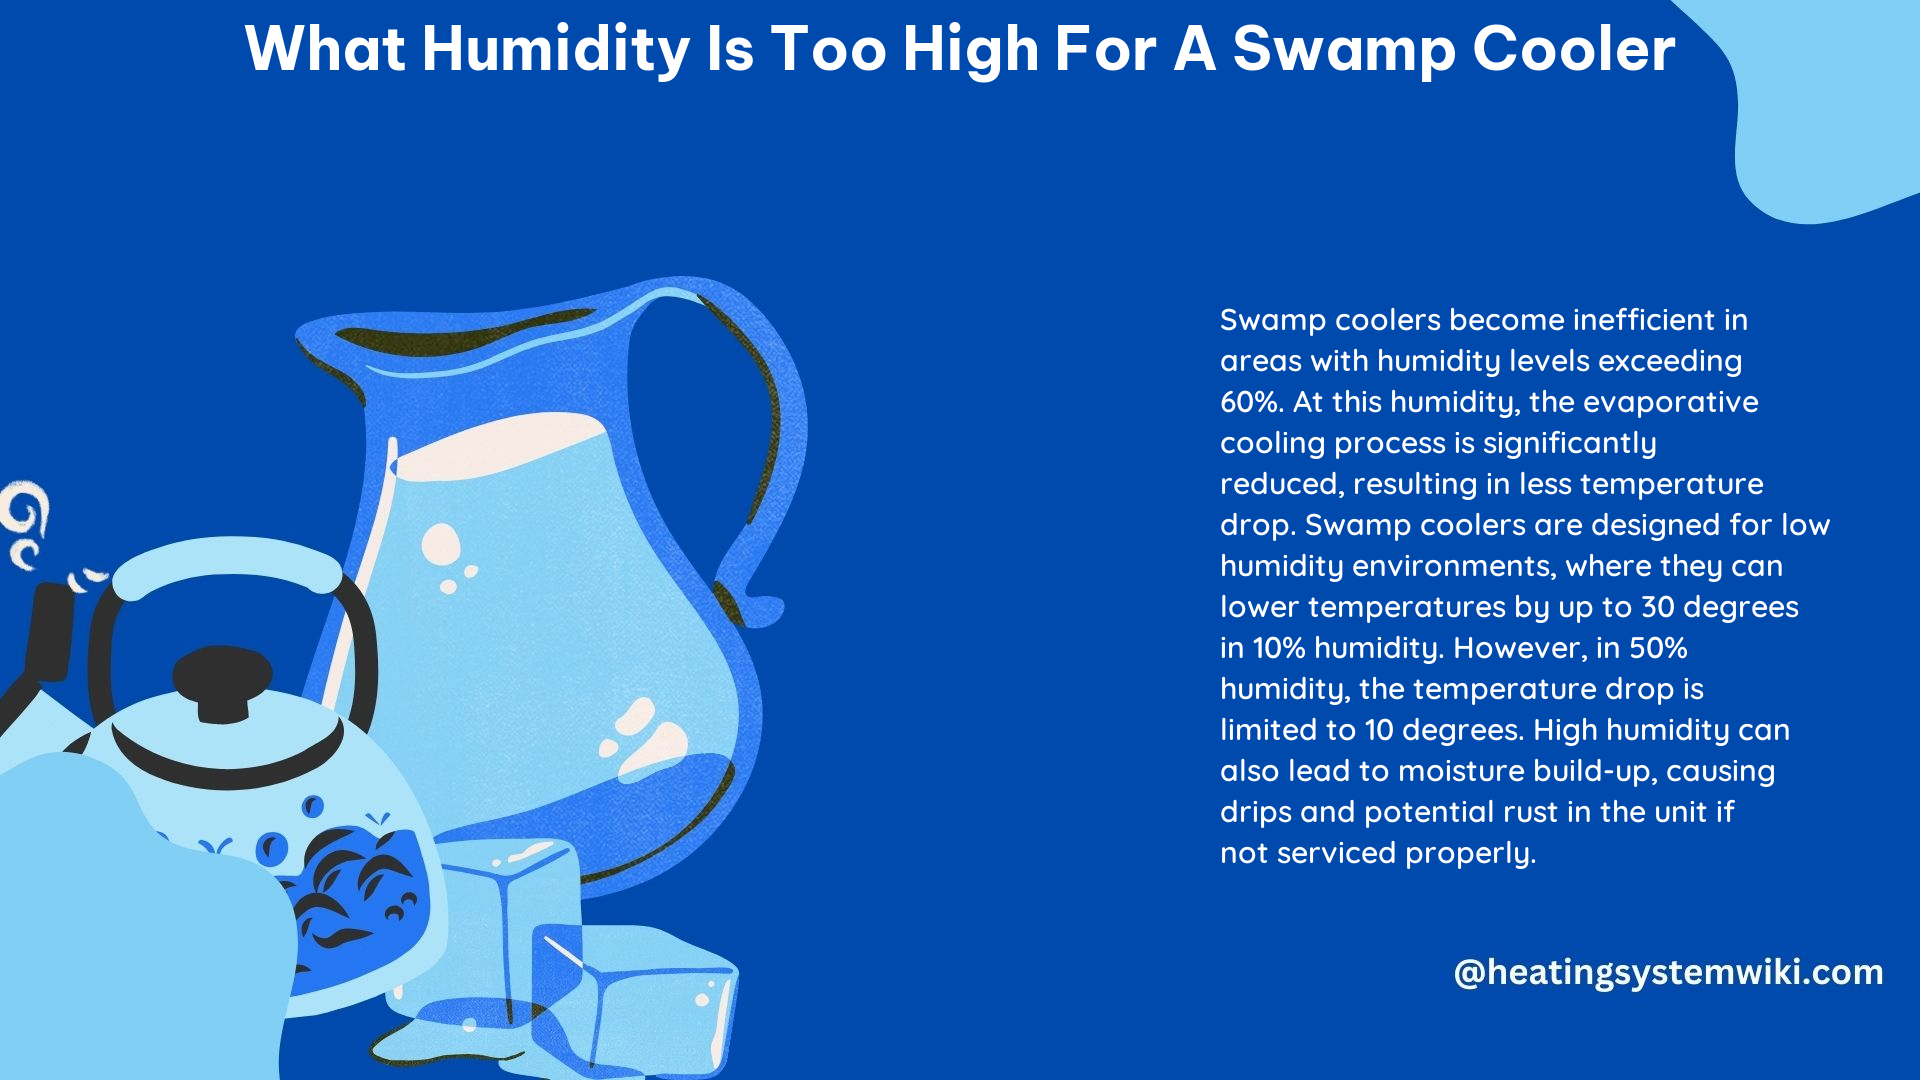 What Humidity Is Too High for a Swamp Cooler